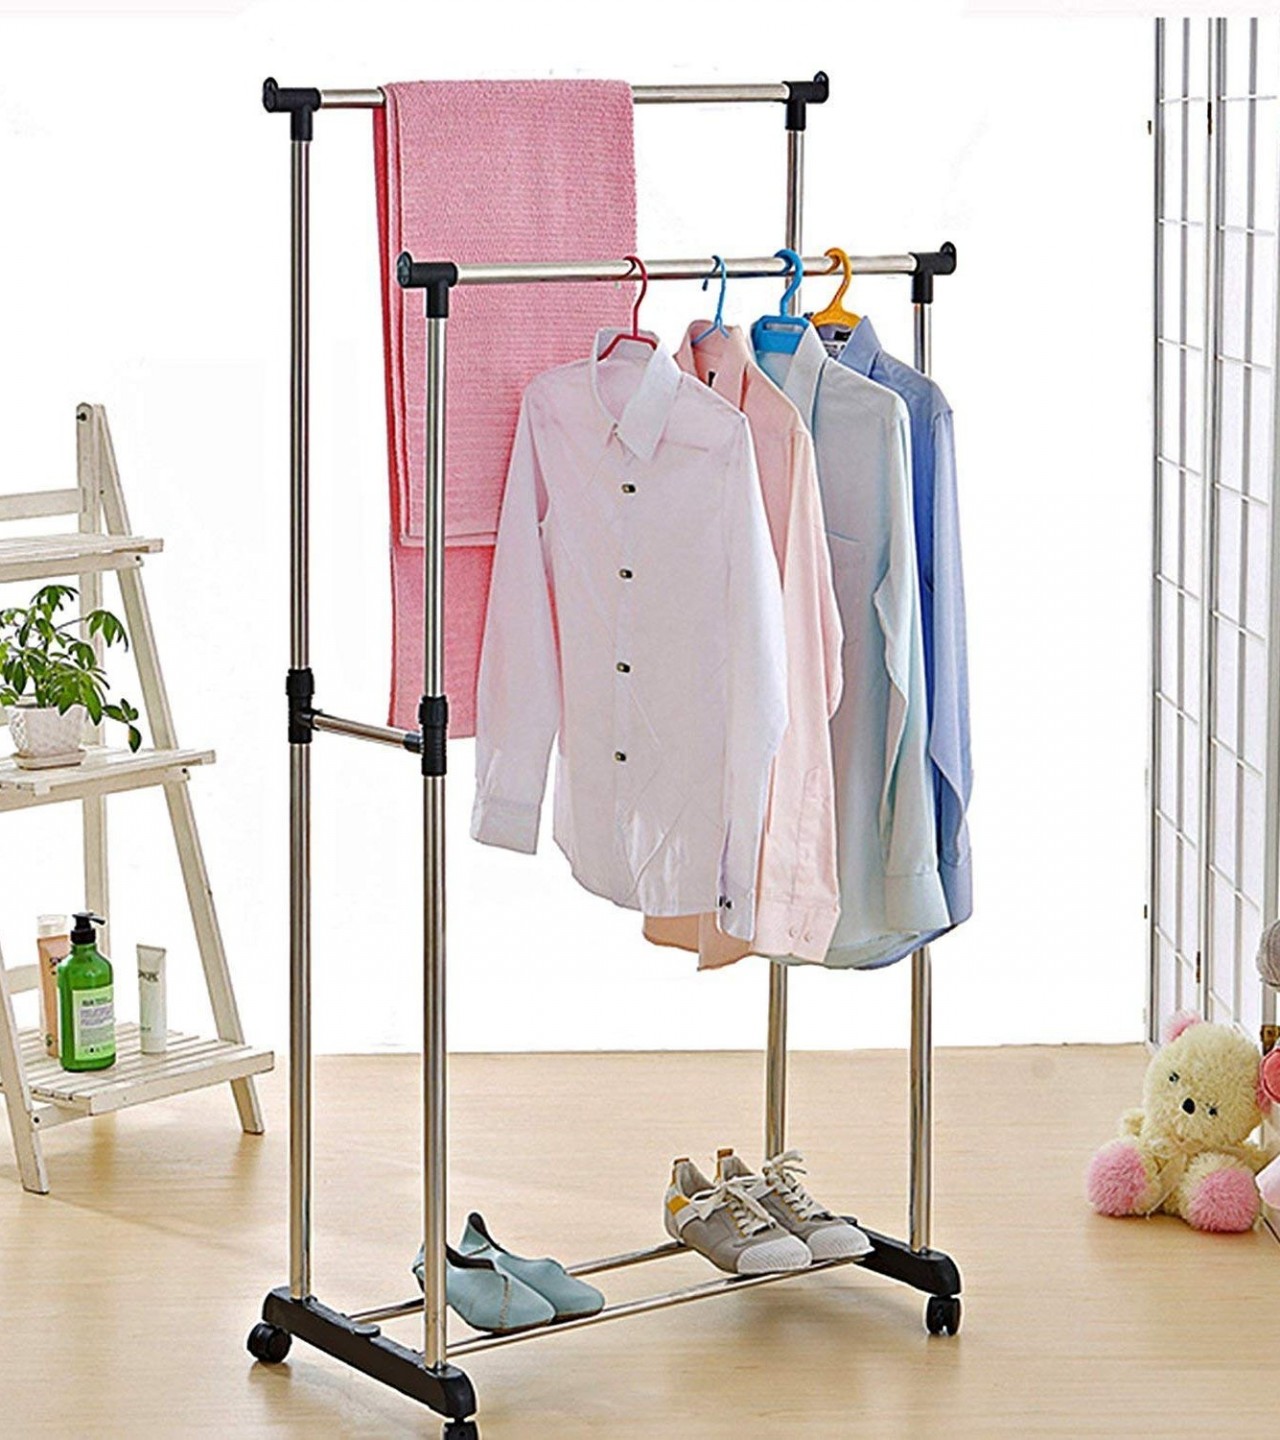 Stainless Steel Double Pole Cloth hanging Rack with Shoe Stand Laundry Rack With Tire